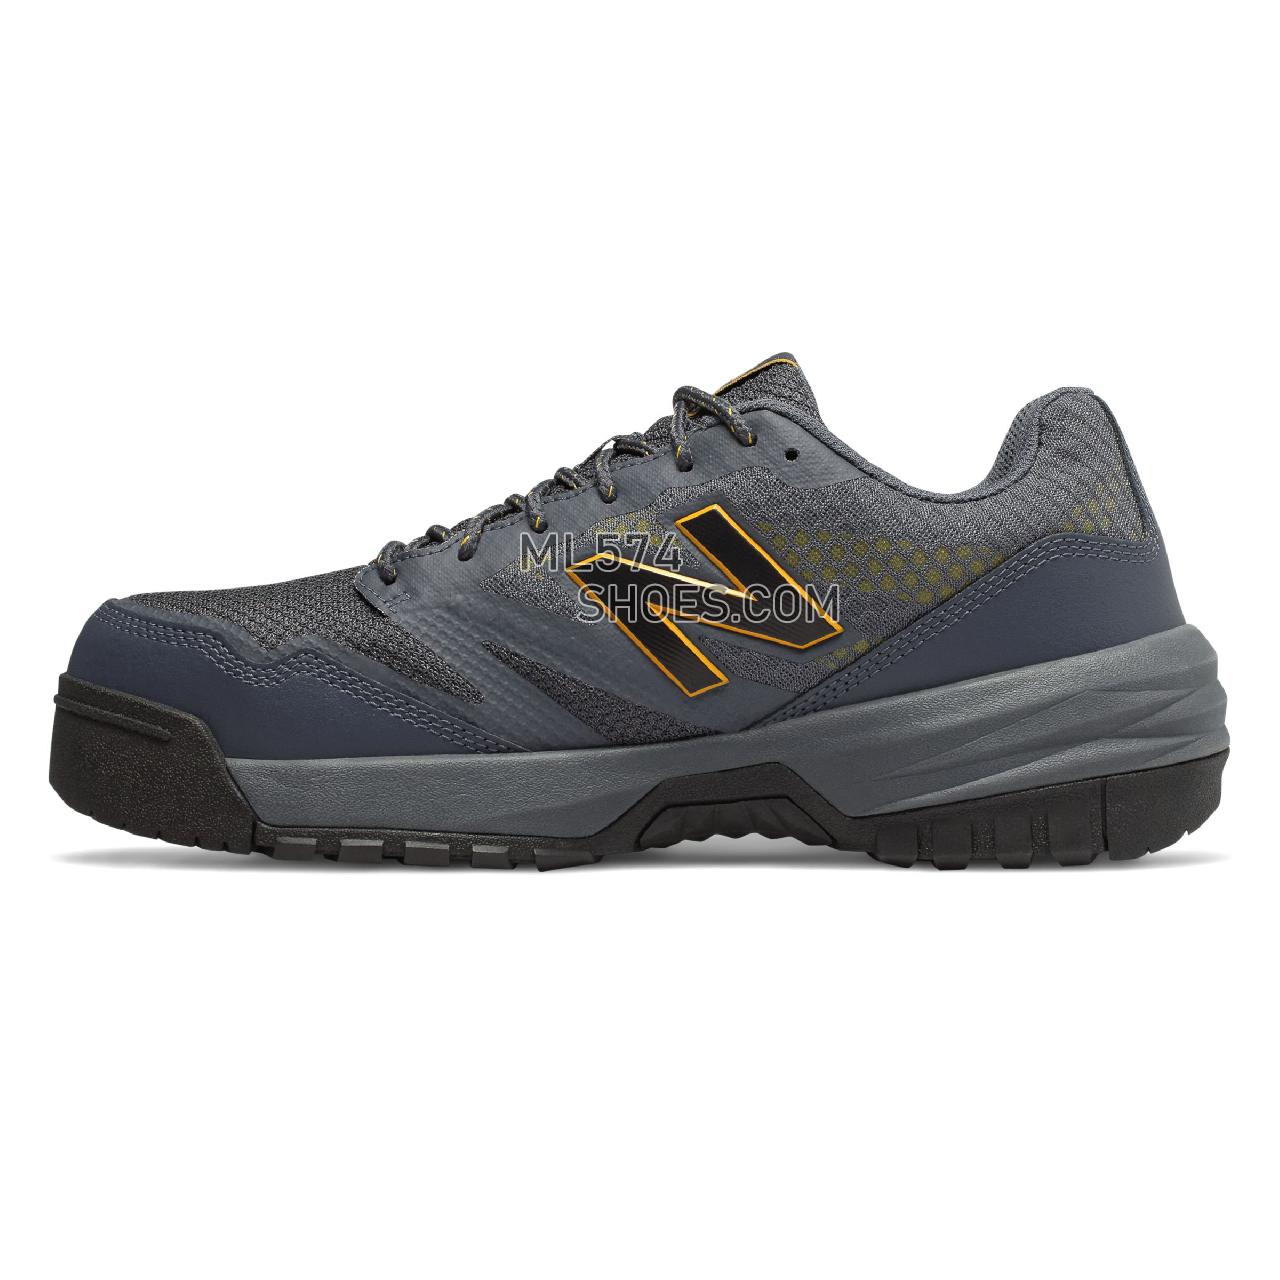 New Balance Composite Toe 589 - Men's Work - Chalkboard with Sunflower and Light Cliff Grey - MID589LC